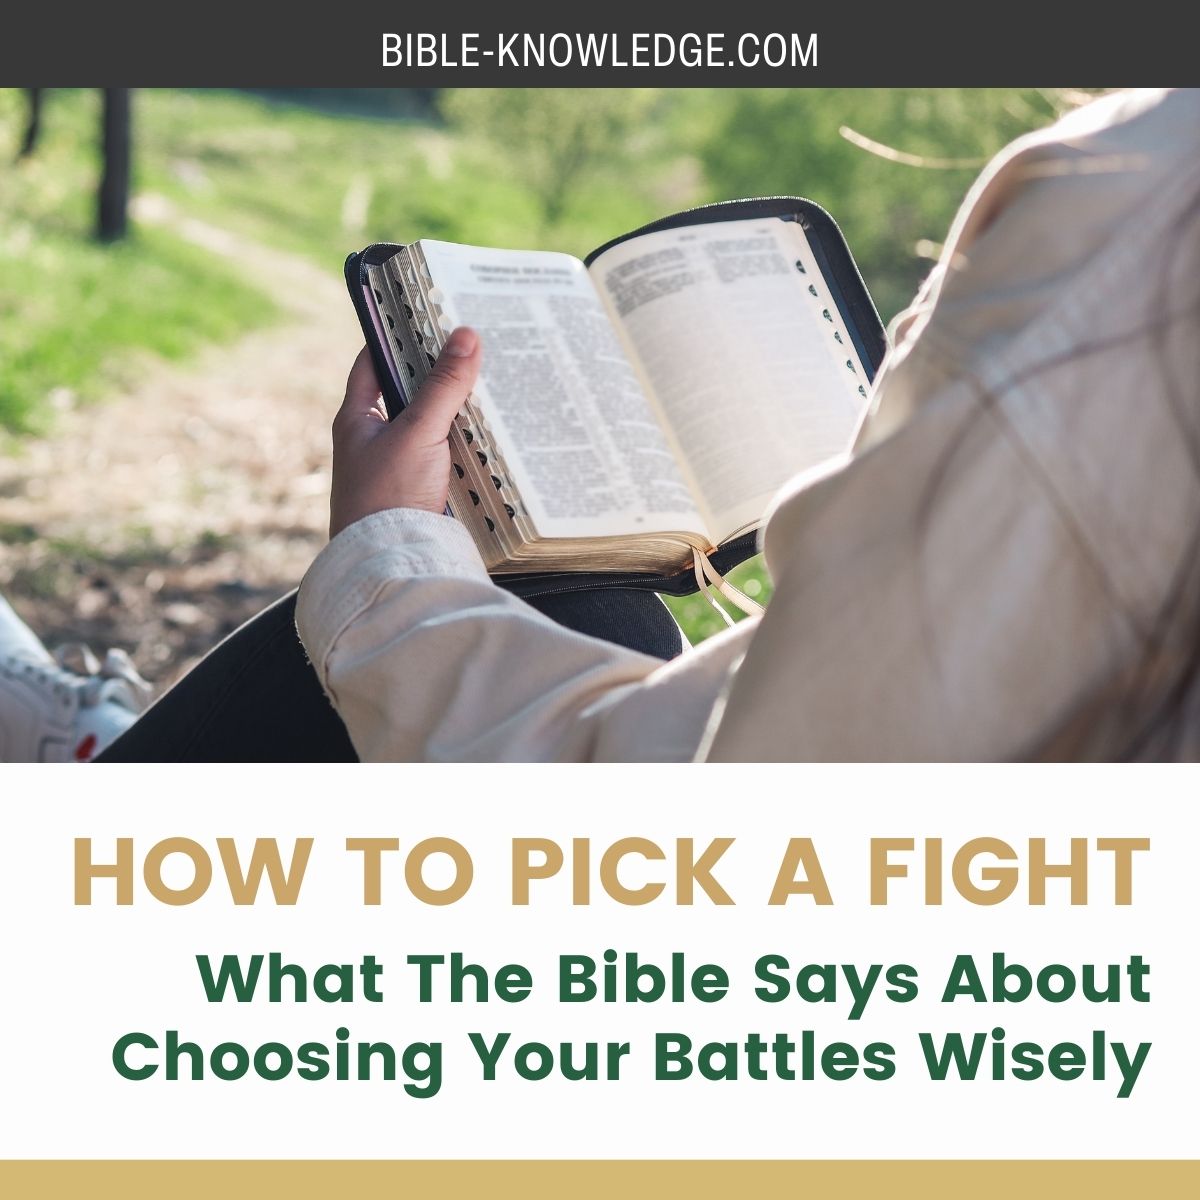 What the Word of God Says About Choosing Your Battles Wisely